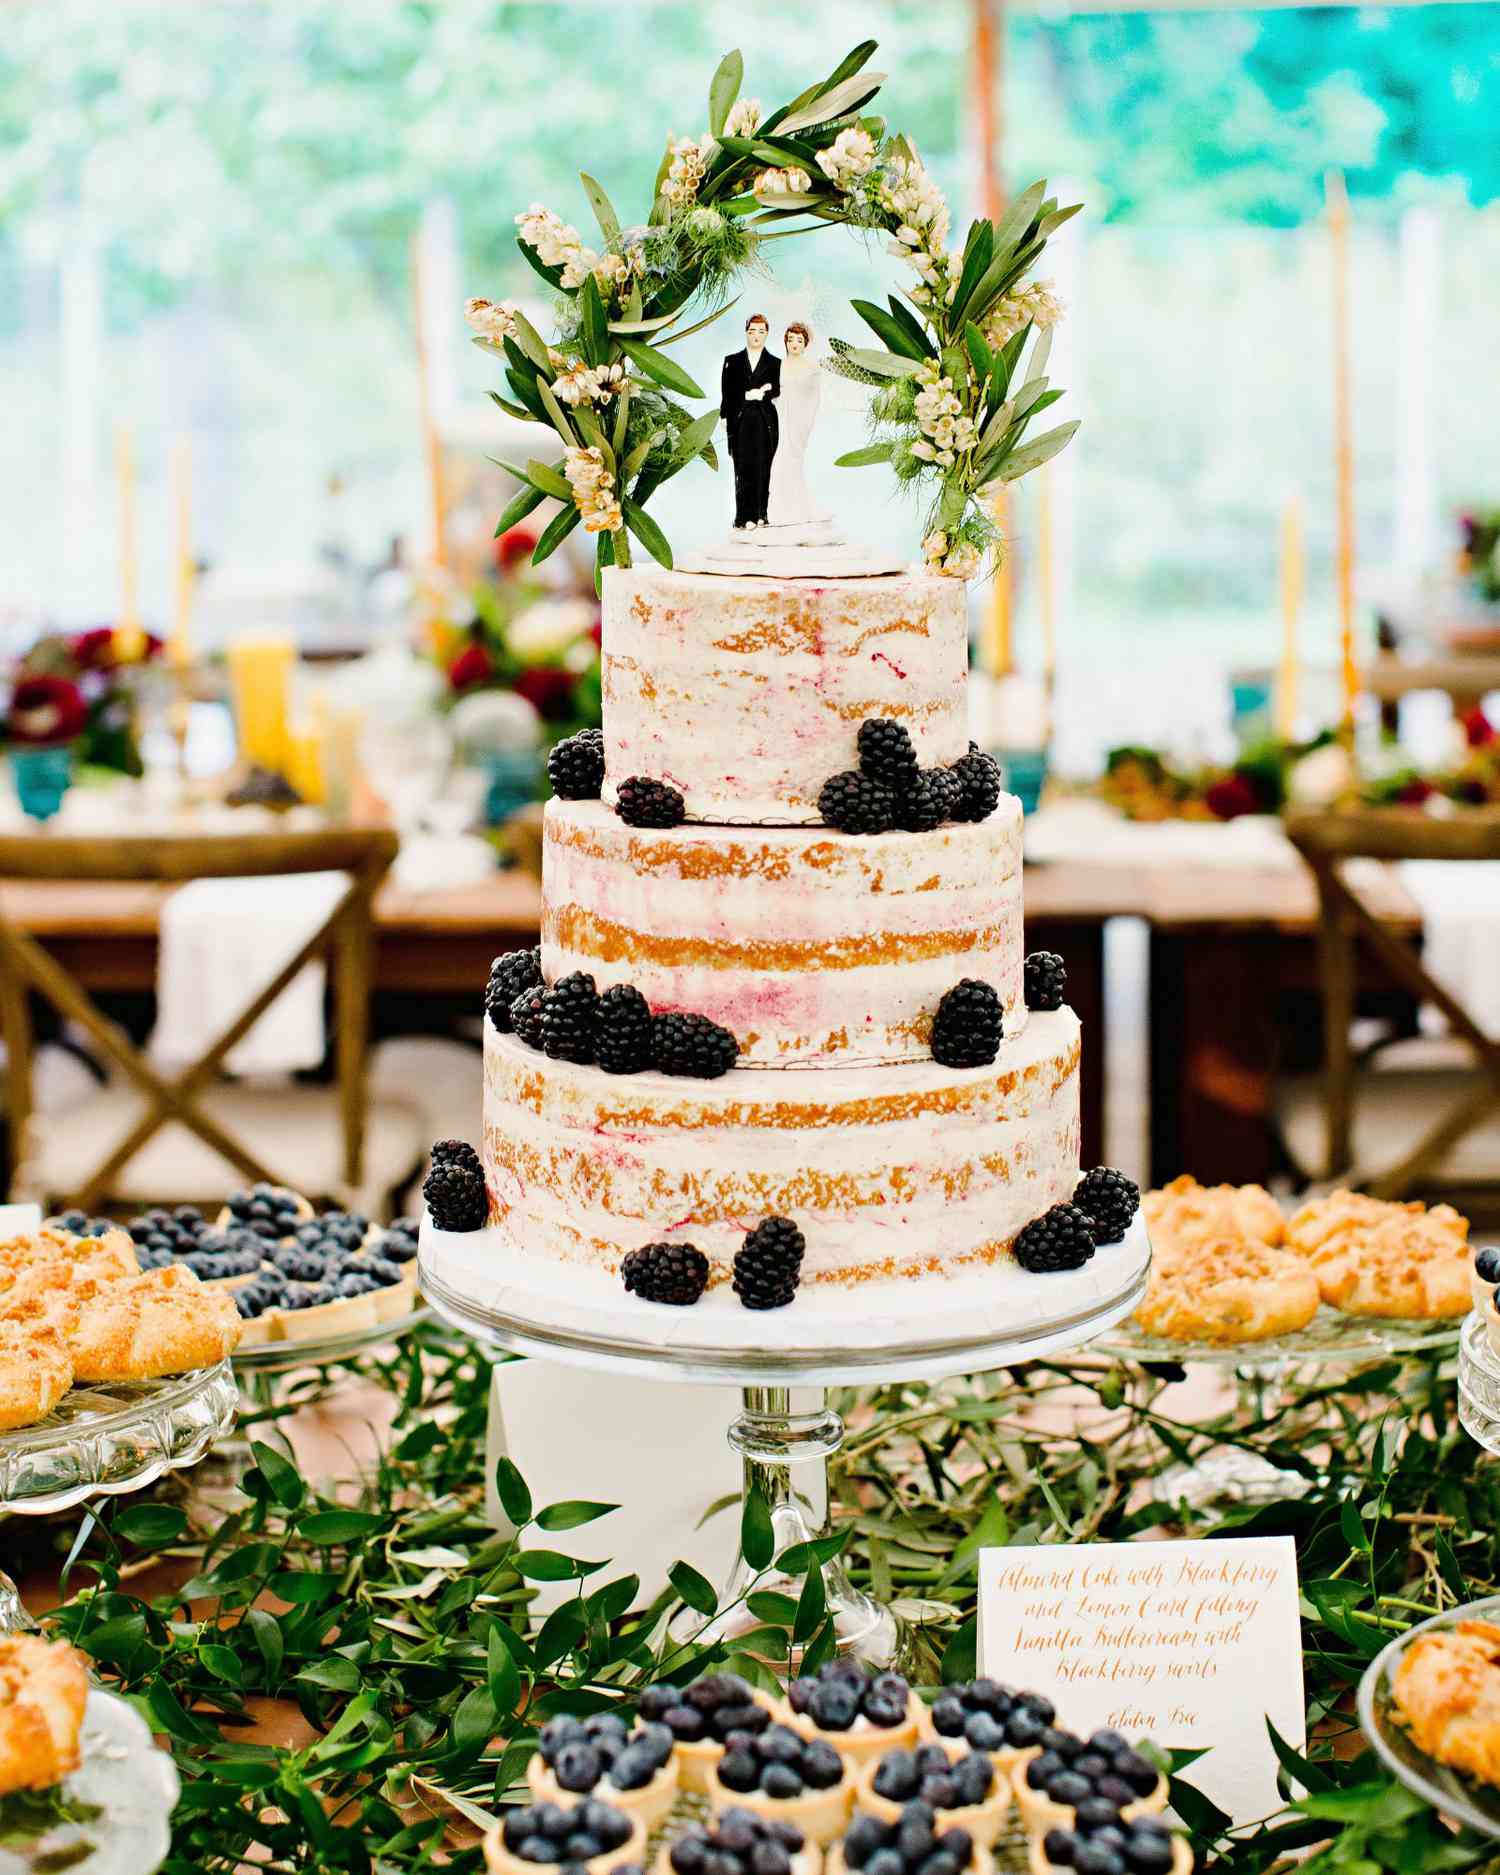 Wedding Cake with Berries, Grapes, Figs, and Pears